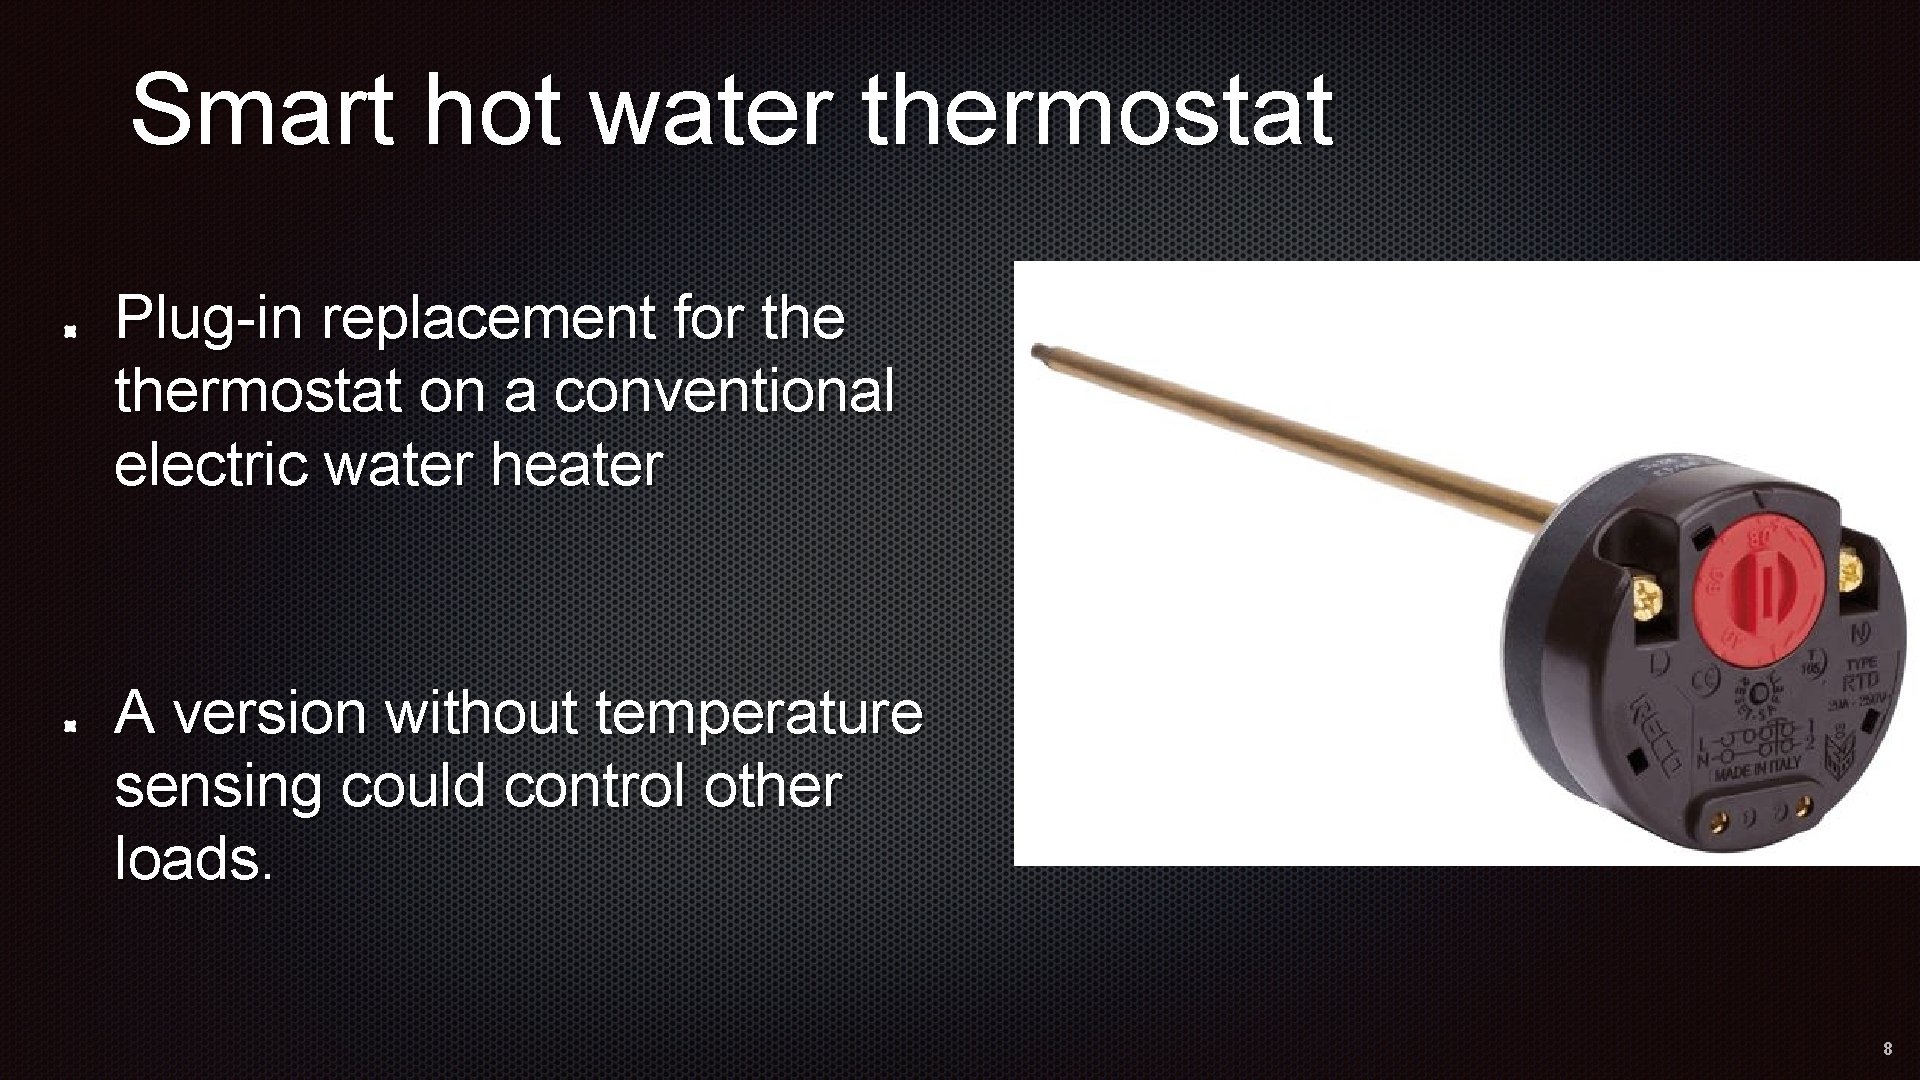 Smart hot water thermostat Plug-in replacement for thermostat on a conventional electric water heater